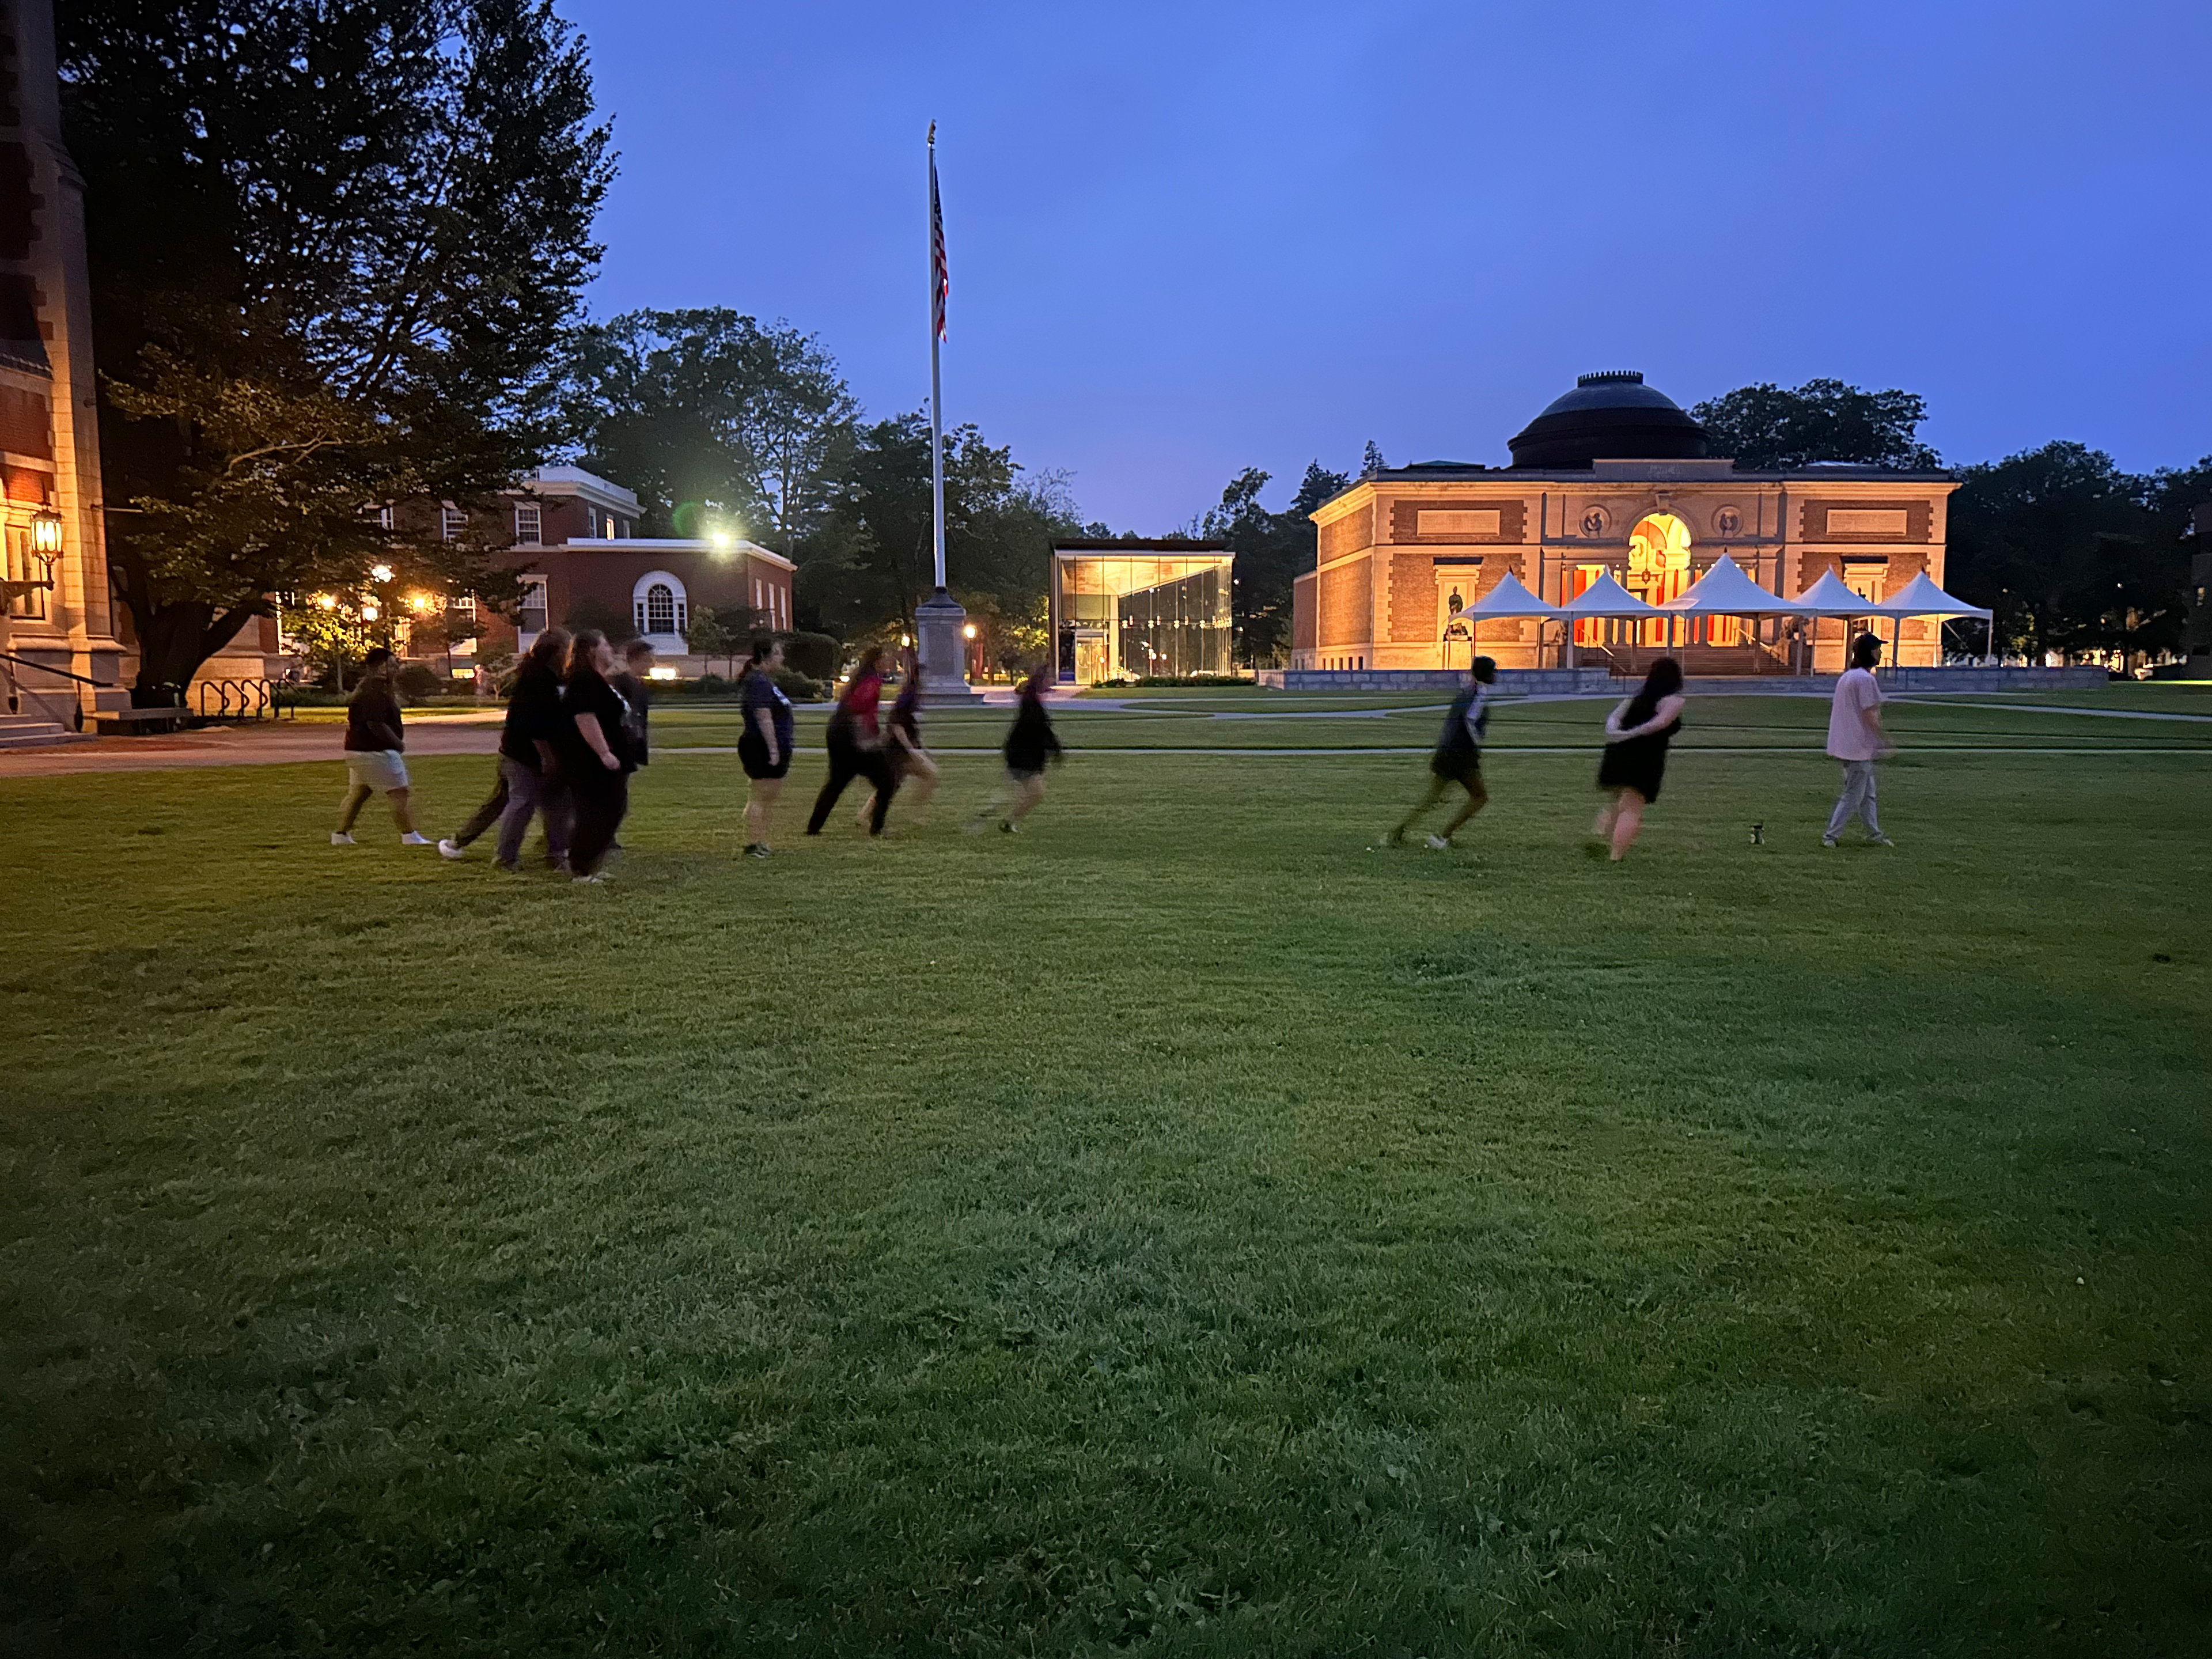 Students play capture the flag at dusk